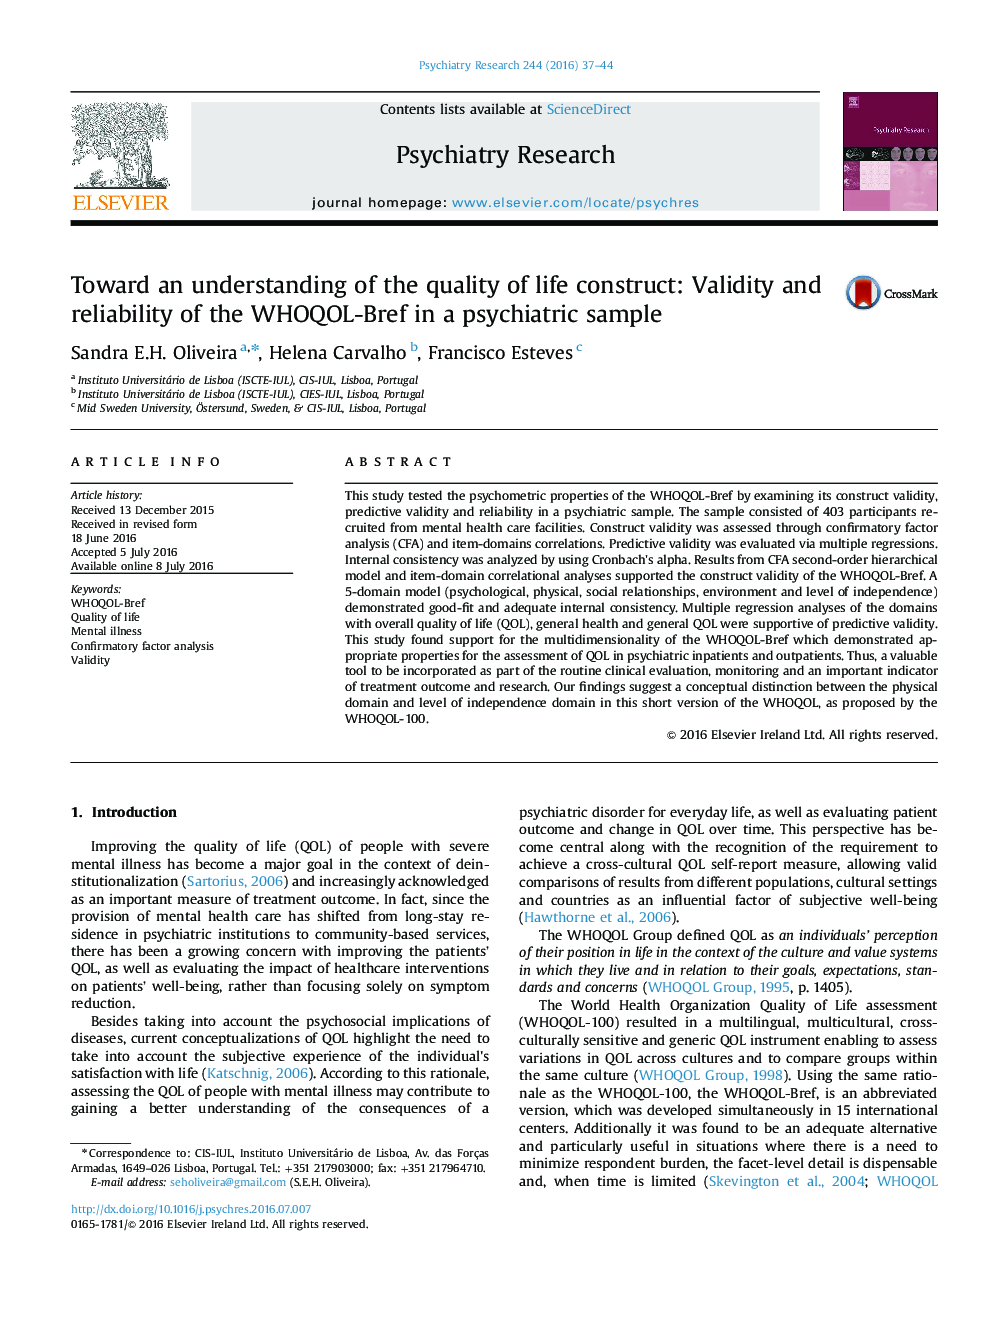 Toward an understanding of the quality of life construct: Validity and reliability of the WHOQOL-Bref in a psychiatric sample